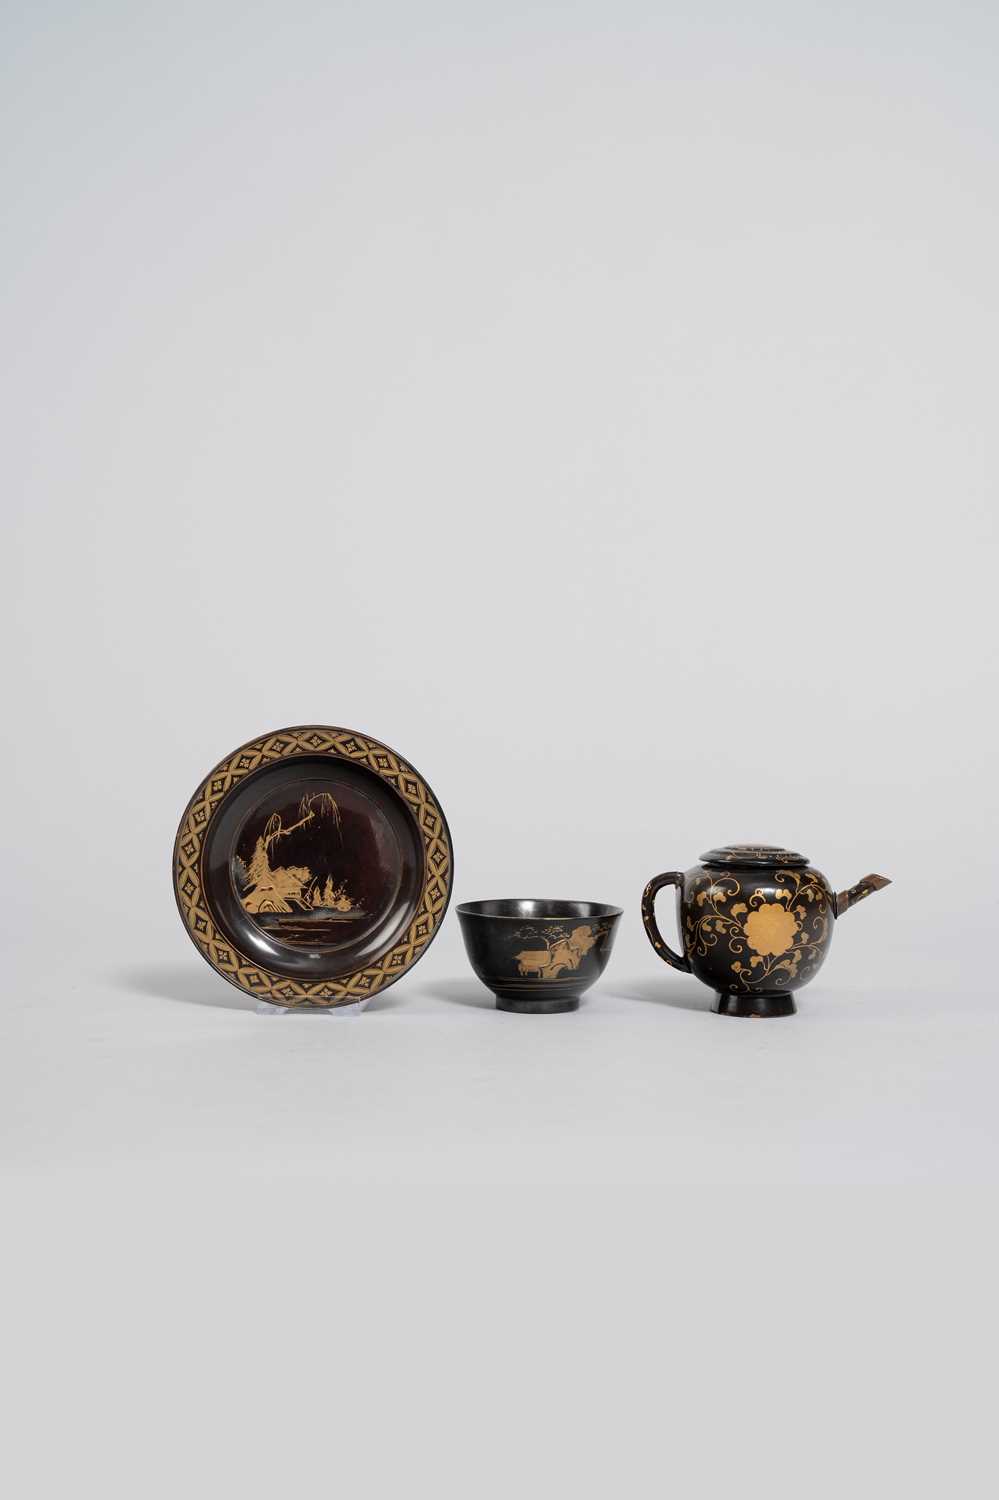 THREE SMALL JAPANESE BLACK AND GOLD LACQUER PIECES EDO PERIOD, 17TH/18TH CENTURY Comprising: a cup